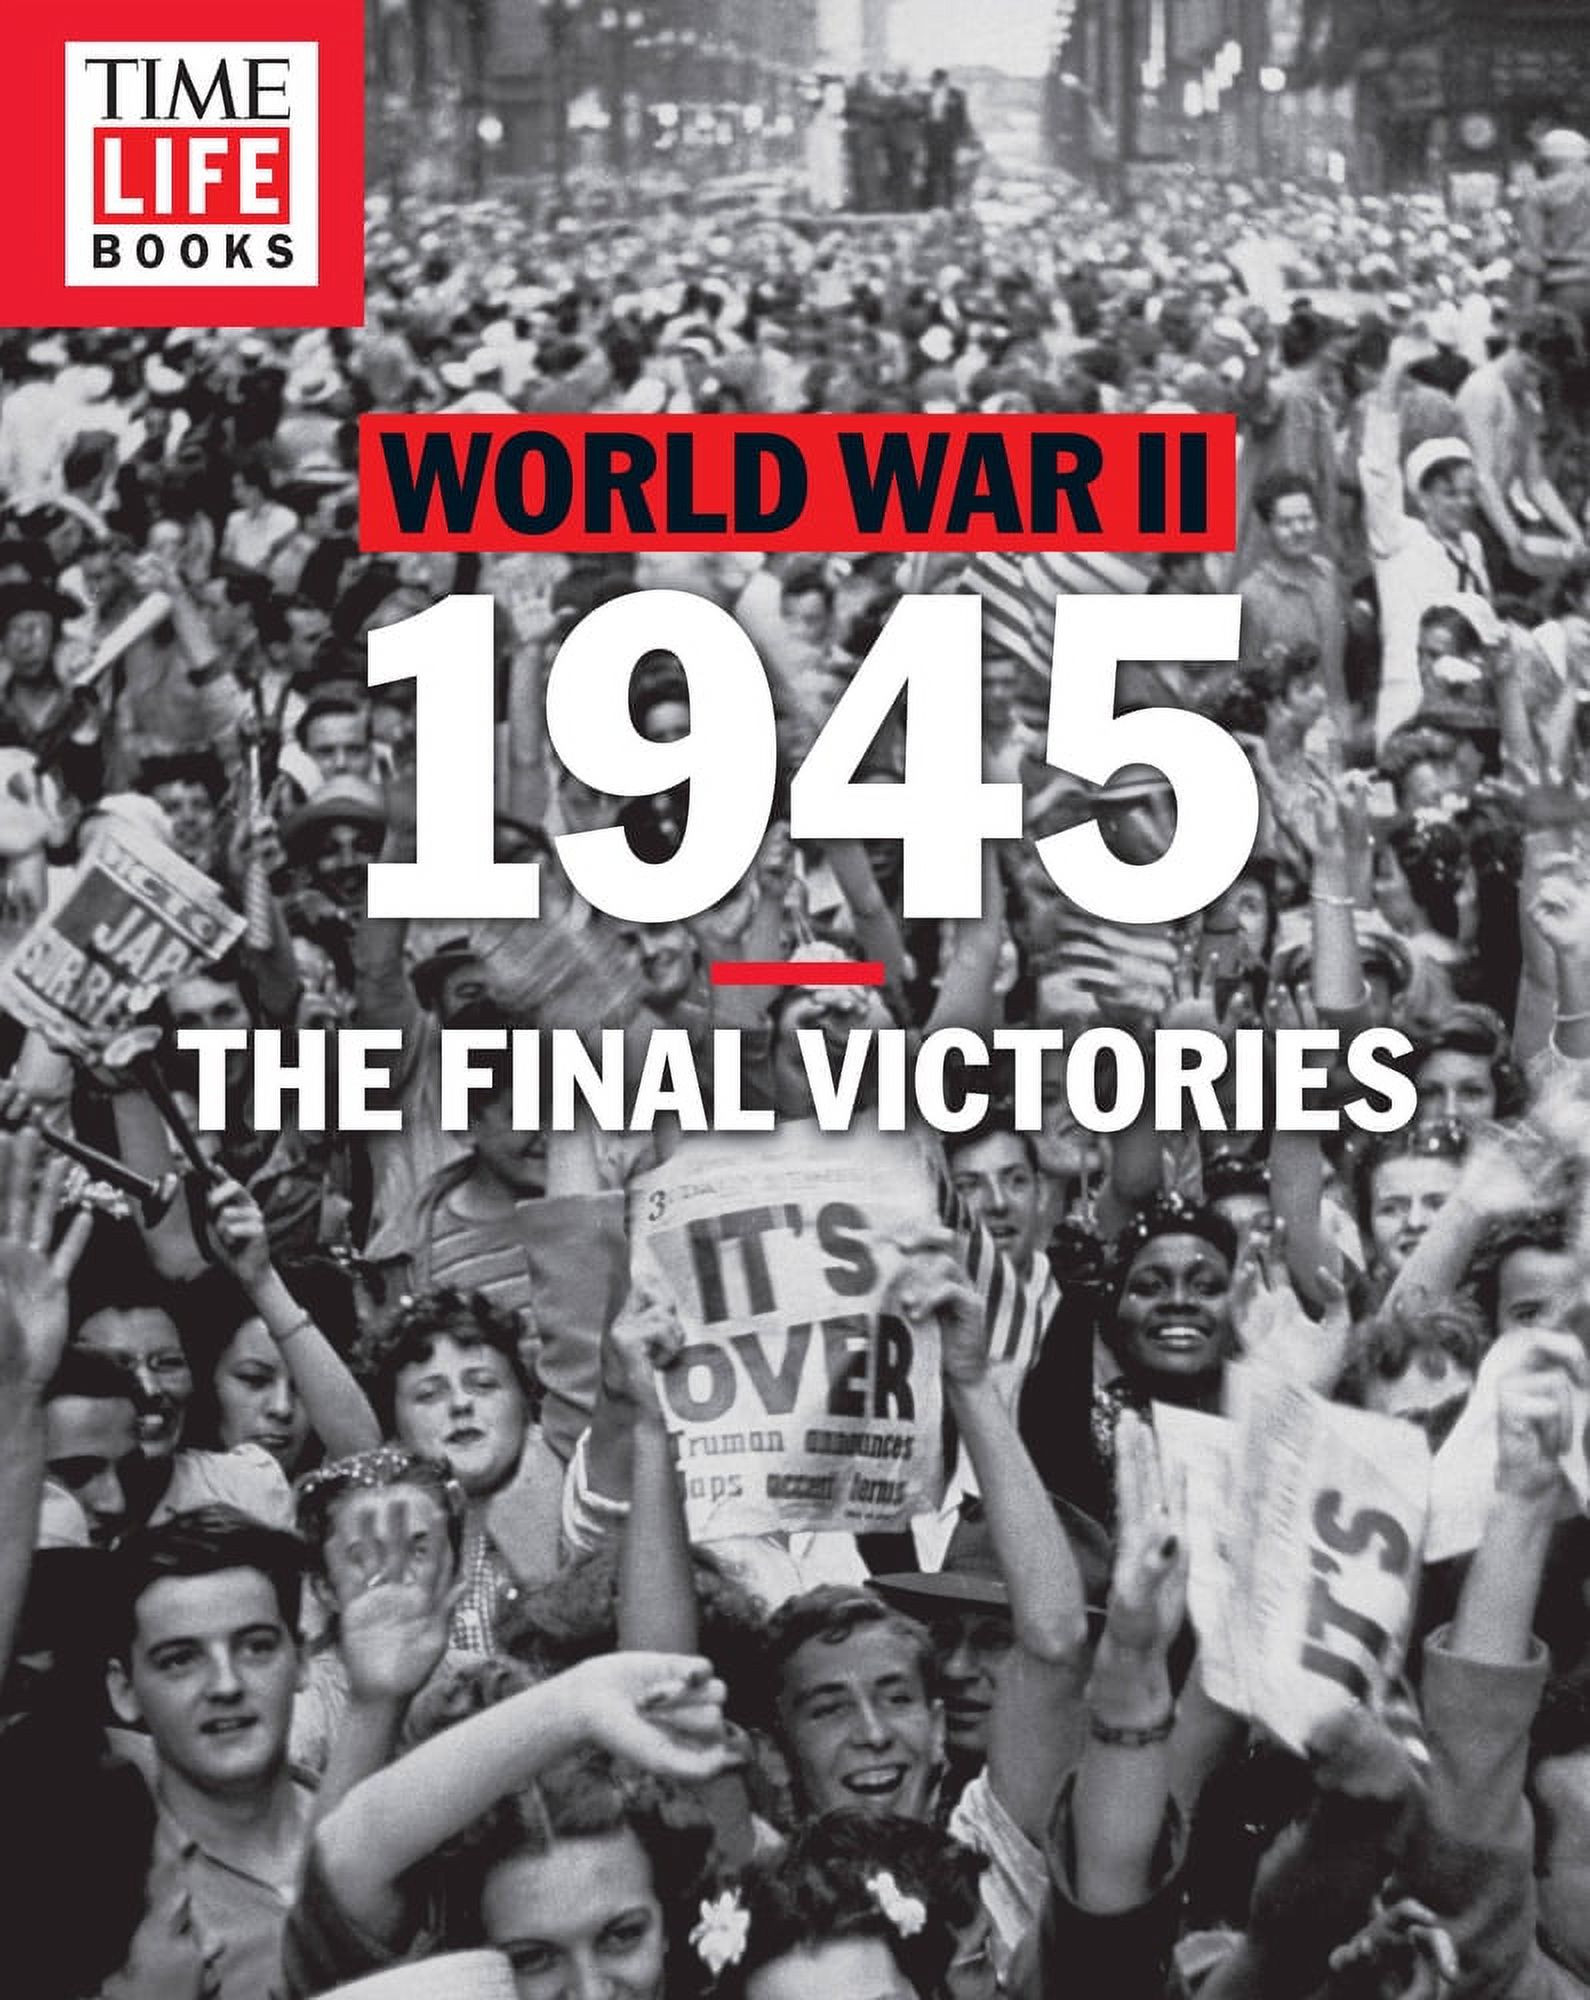 TIME-LIFE World War II: 1945 : The Final Victories (Paperback) - image 1 of 1